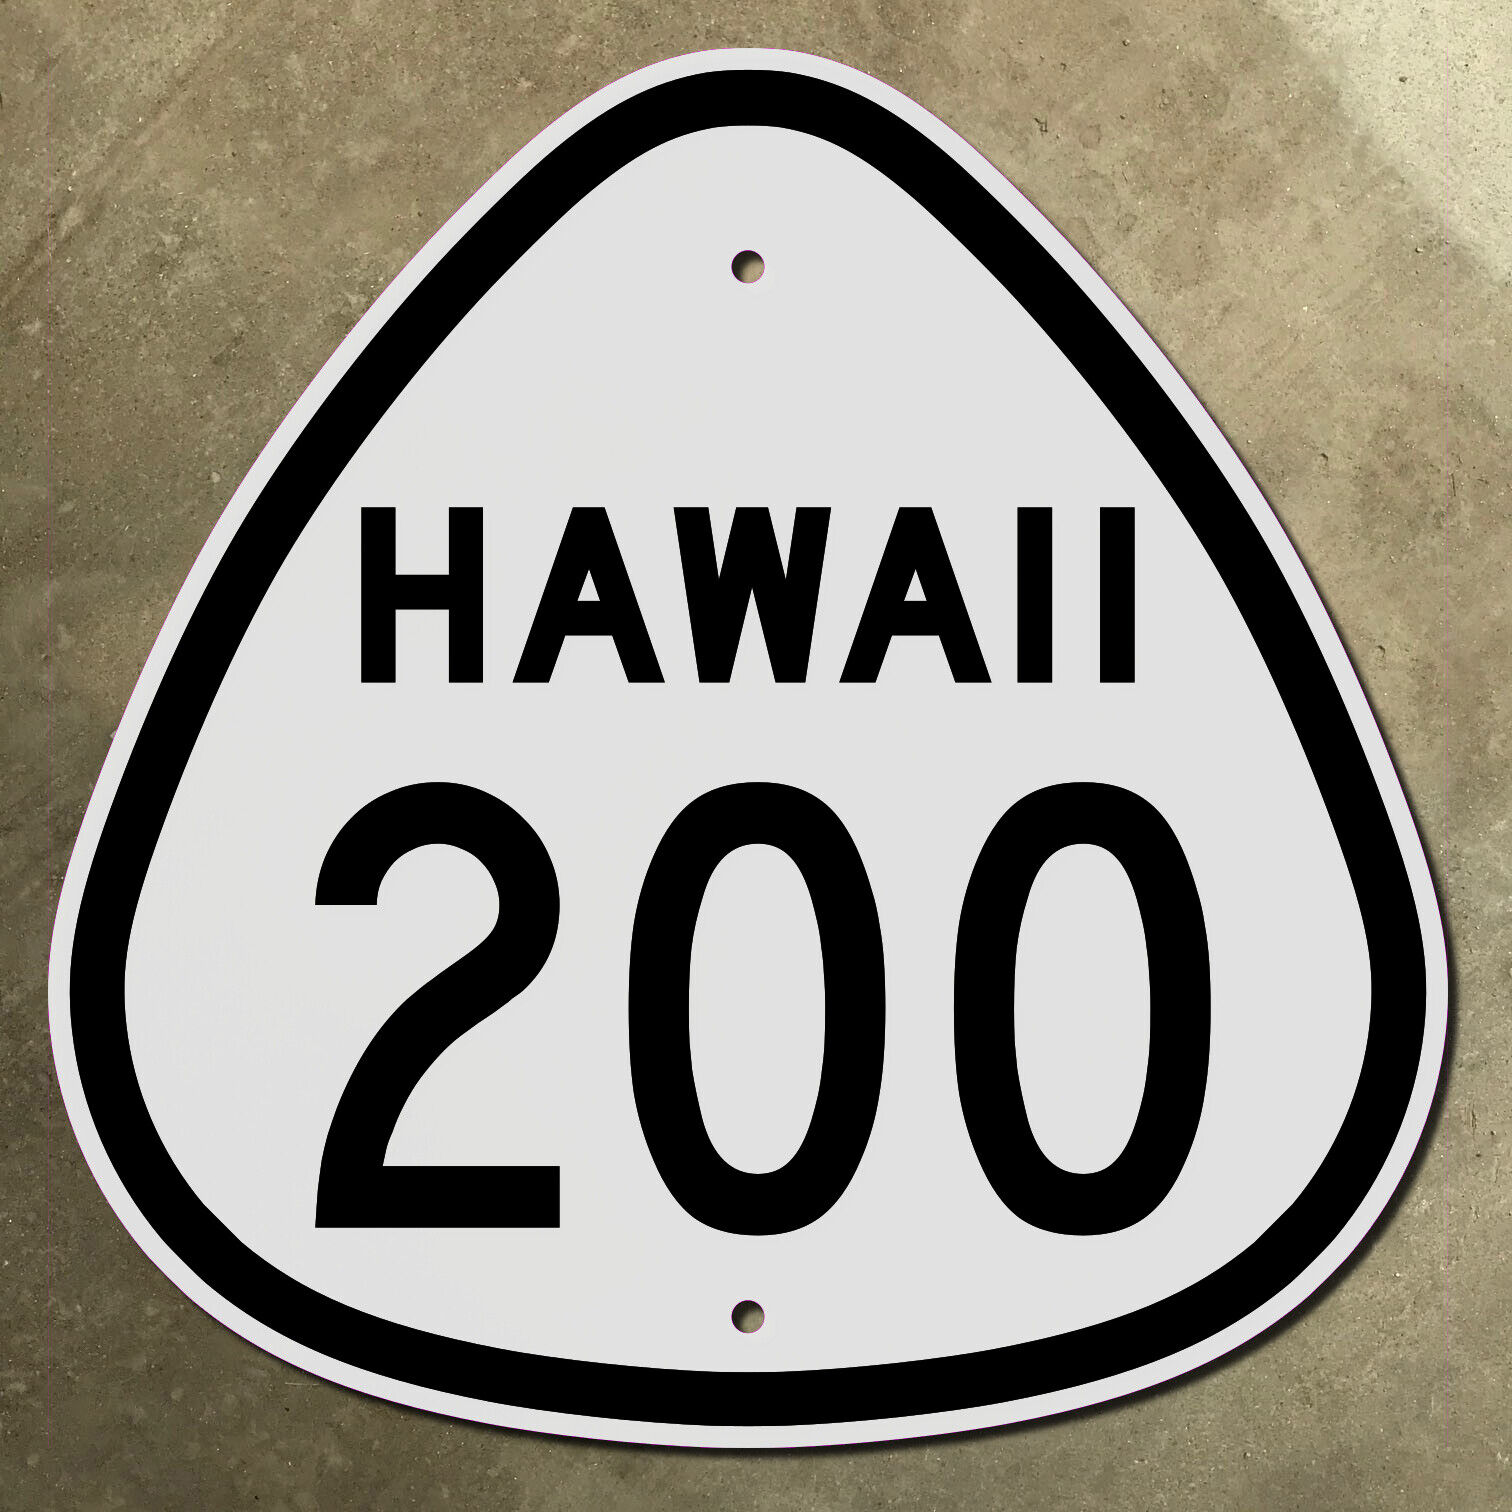 Hawaii Route 200 highway marker road sign 1956 Saddle Road big island Hilo 16x16